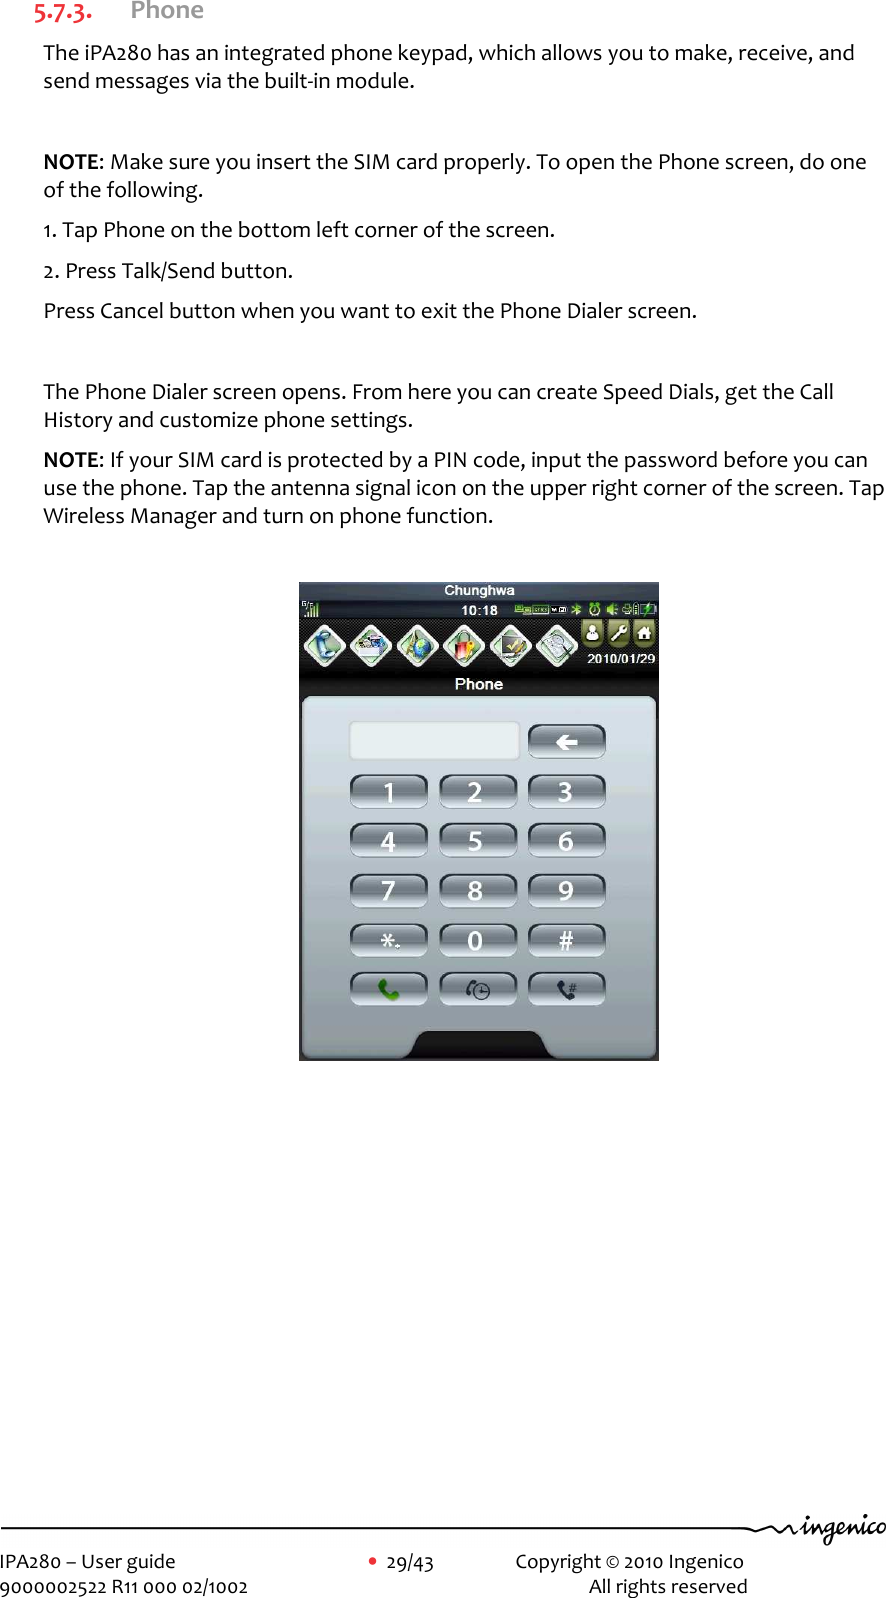     IPA280 – User guide      •  29/43    Copyright © 2010 Ingenico   9000002522 R11 000 02/1002          All rights reserved        5.7.3. Phone The iPA280 has an integrated phone keypad, which allows you to make, receive, and send messages via the built-in module.  NOTE: Make sure you insert the SIM card properly. To open the Phone screen, do one of the following. 1. Tap Phone on the bottom left corner of the screen. 2. Press Talk/Send button. Press Cancel button when you want to exit the Phone Dialer screen.   The Phone Dialer screen opens. From here you can create Speed Dials, get the Call History and customize phone settings. NOTE: If your SIM card is protected by a PIN code, input the password before you can use the phone. Tap the antenna signal icon on the upper right corner of the screen. Tap Wireless Manager and turn on phone function.             